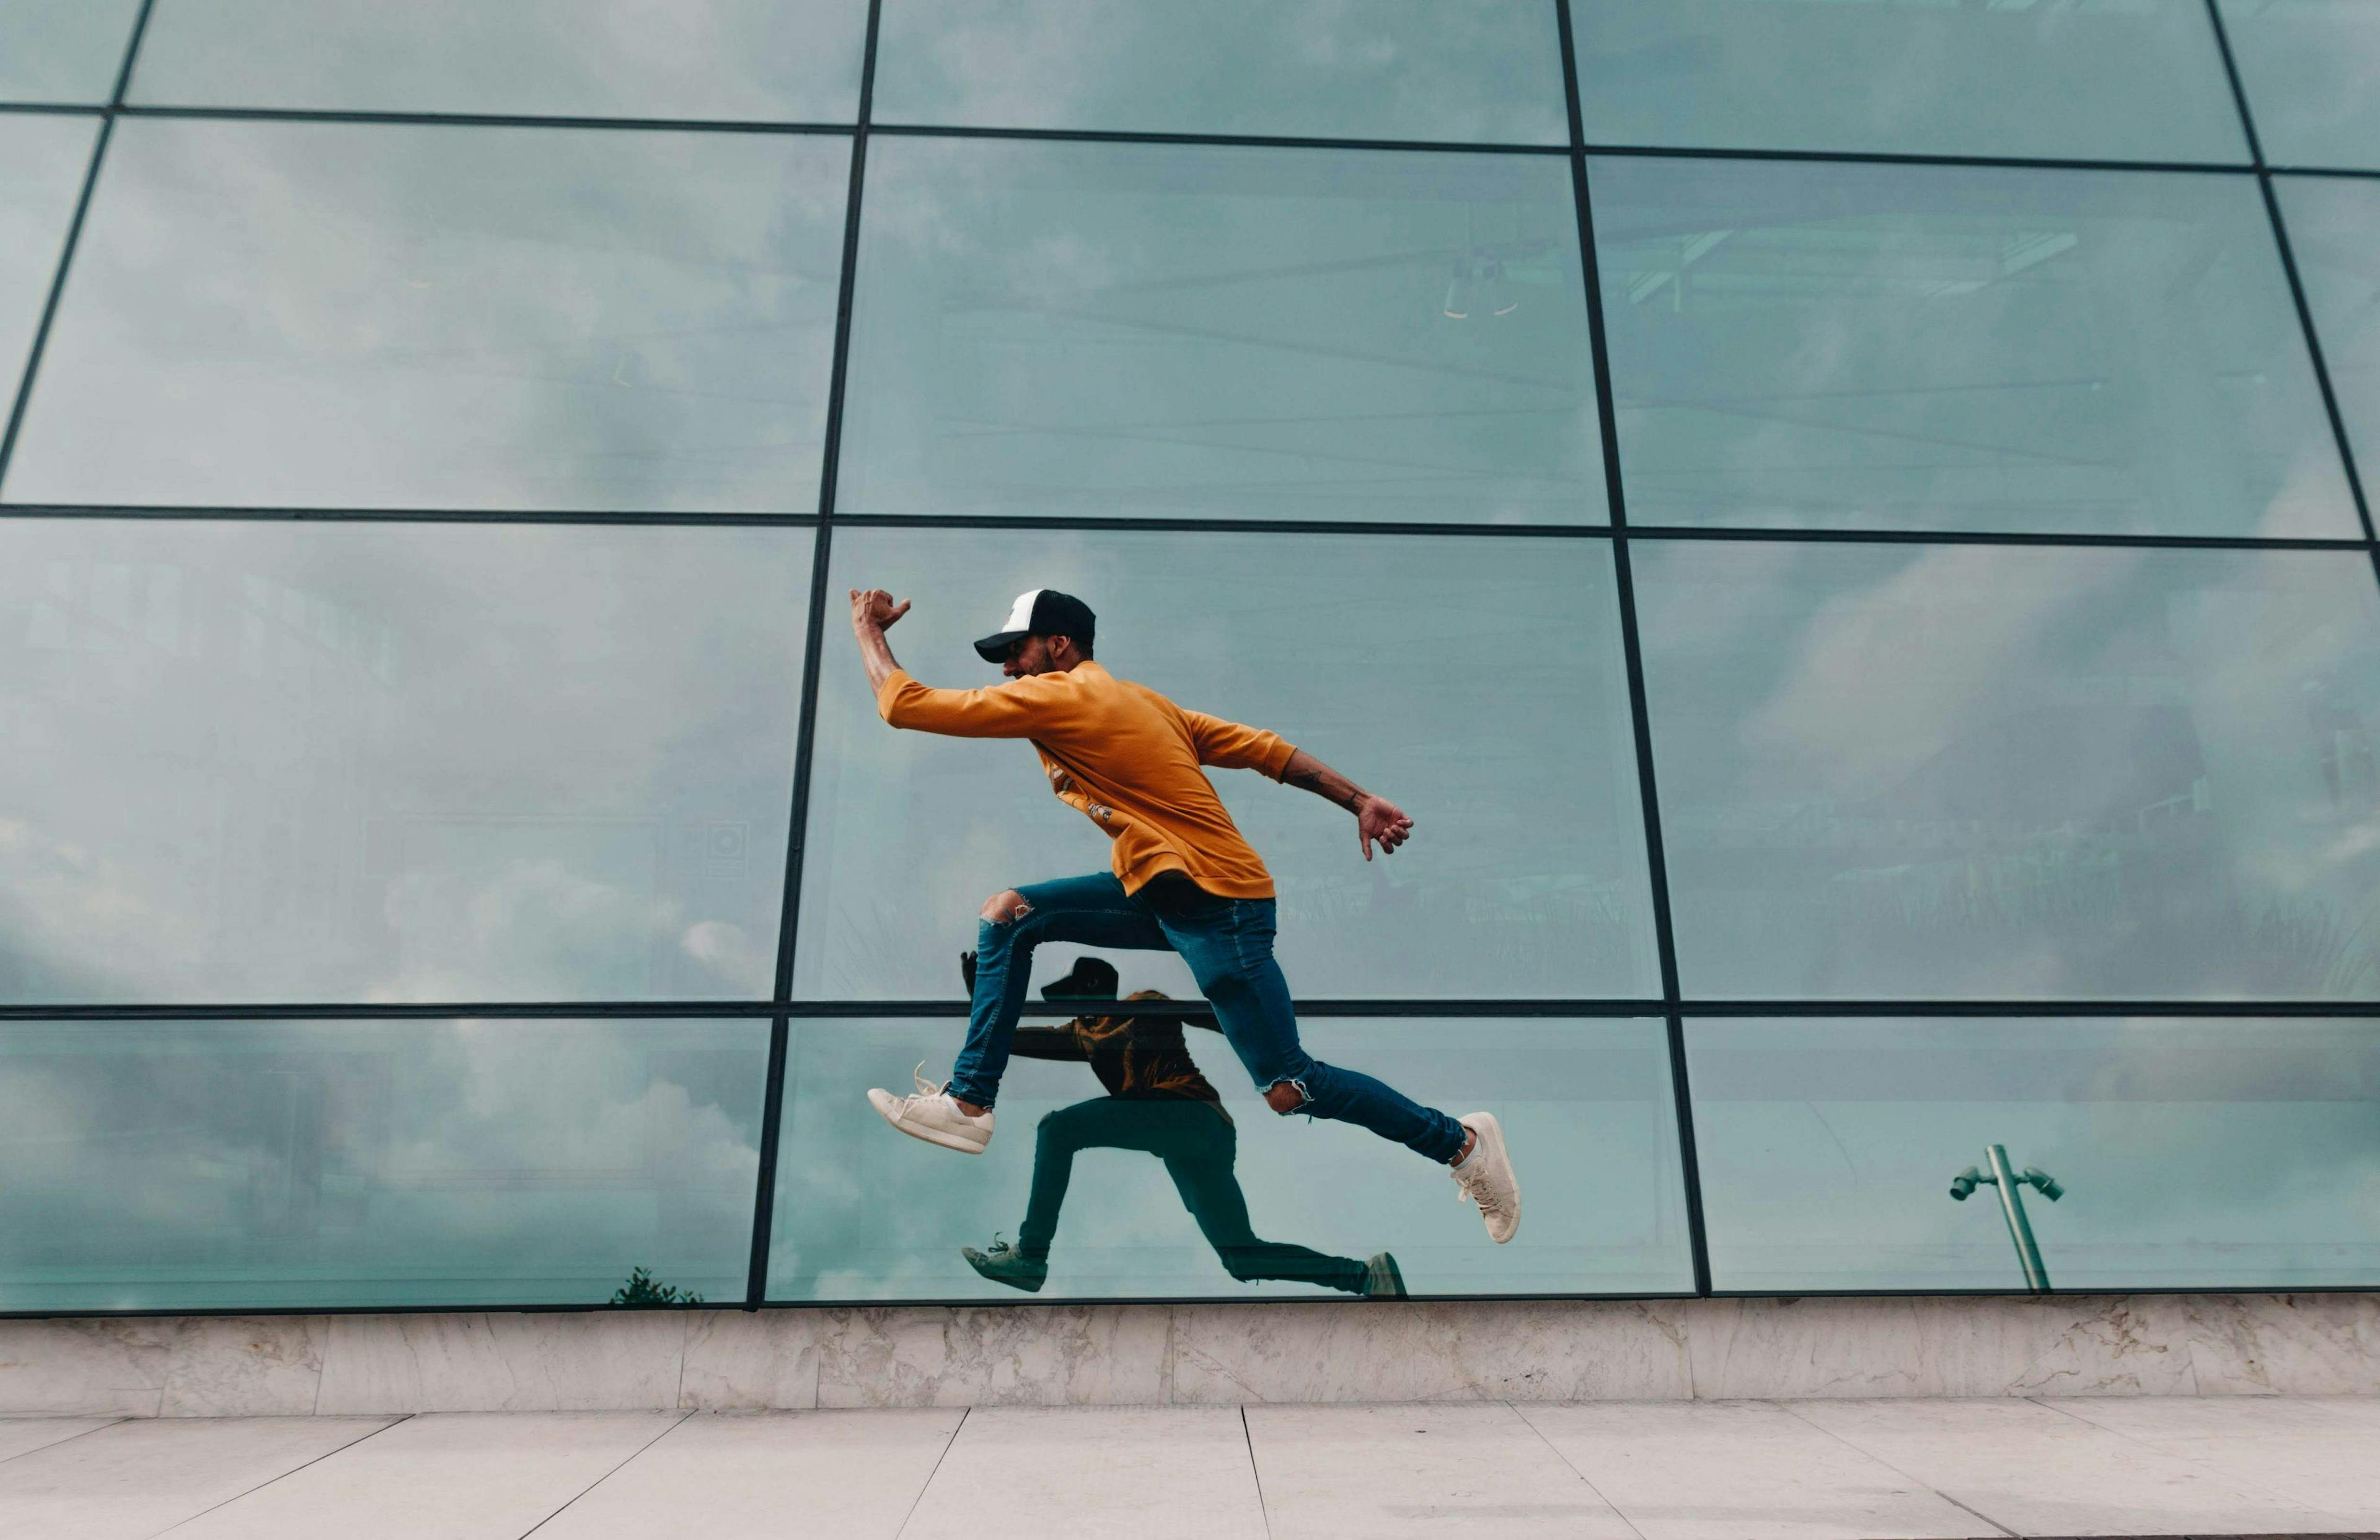 A person in a yellow sweater and cap leaps mid-air, reflected in a large glass building facade, against a cloudy sky backdrop.